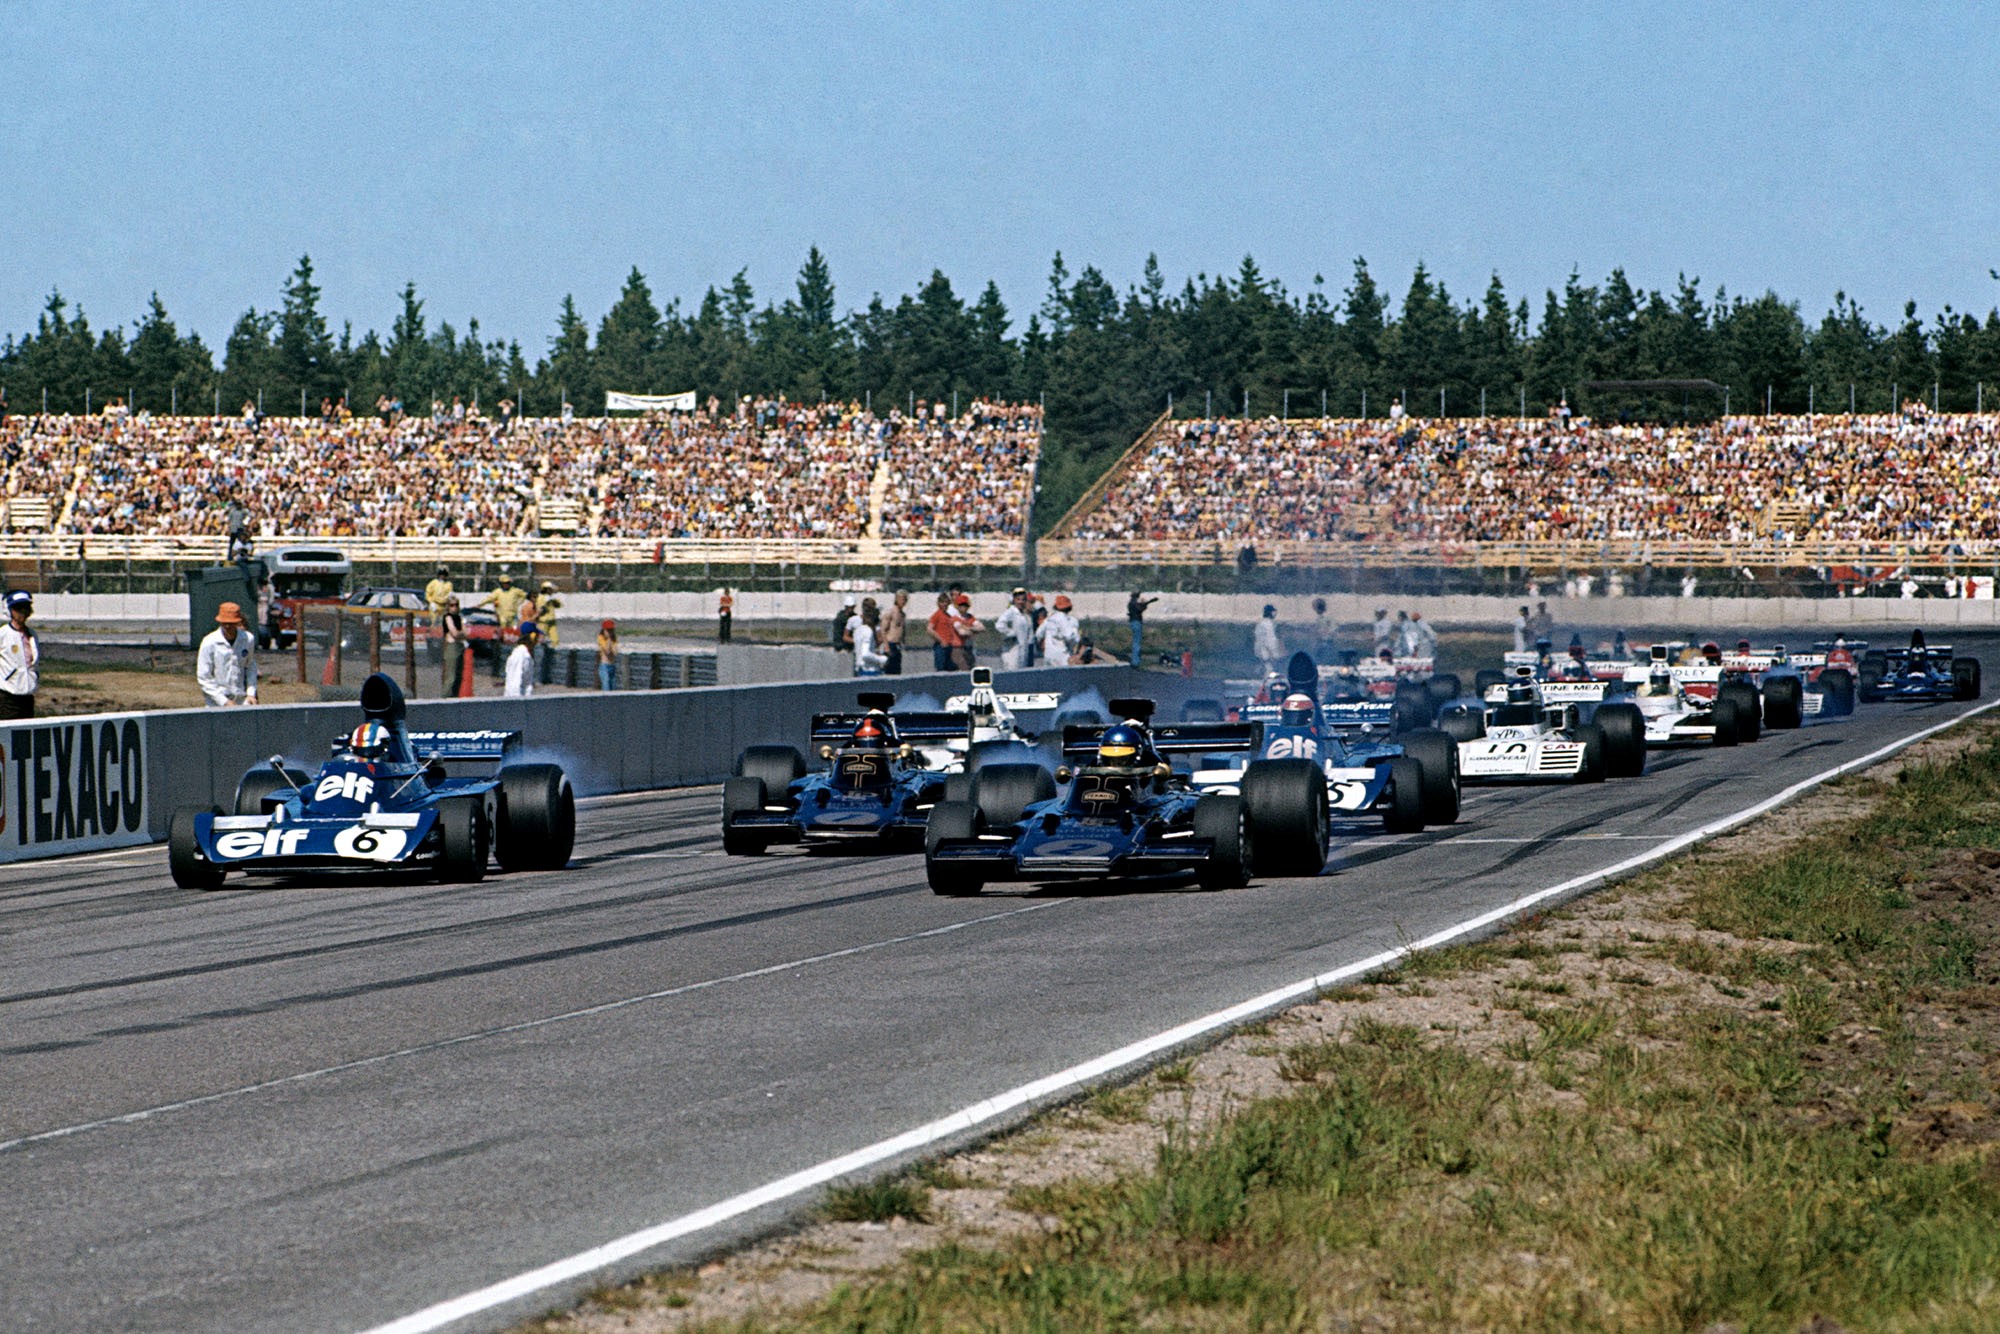 Anderstorp 1973 Swedish Grand Prix. The cars pull away at the start of the race. 